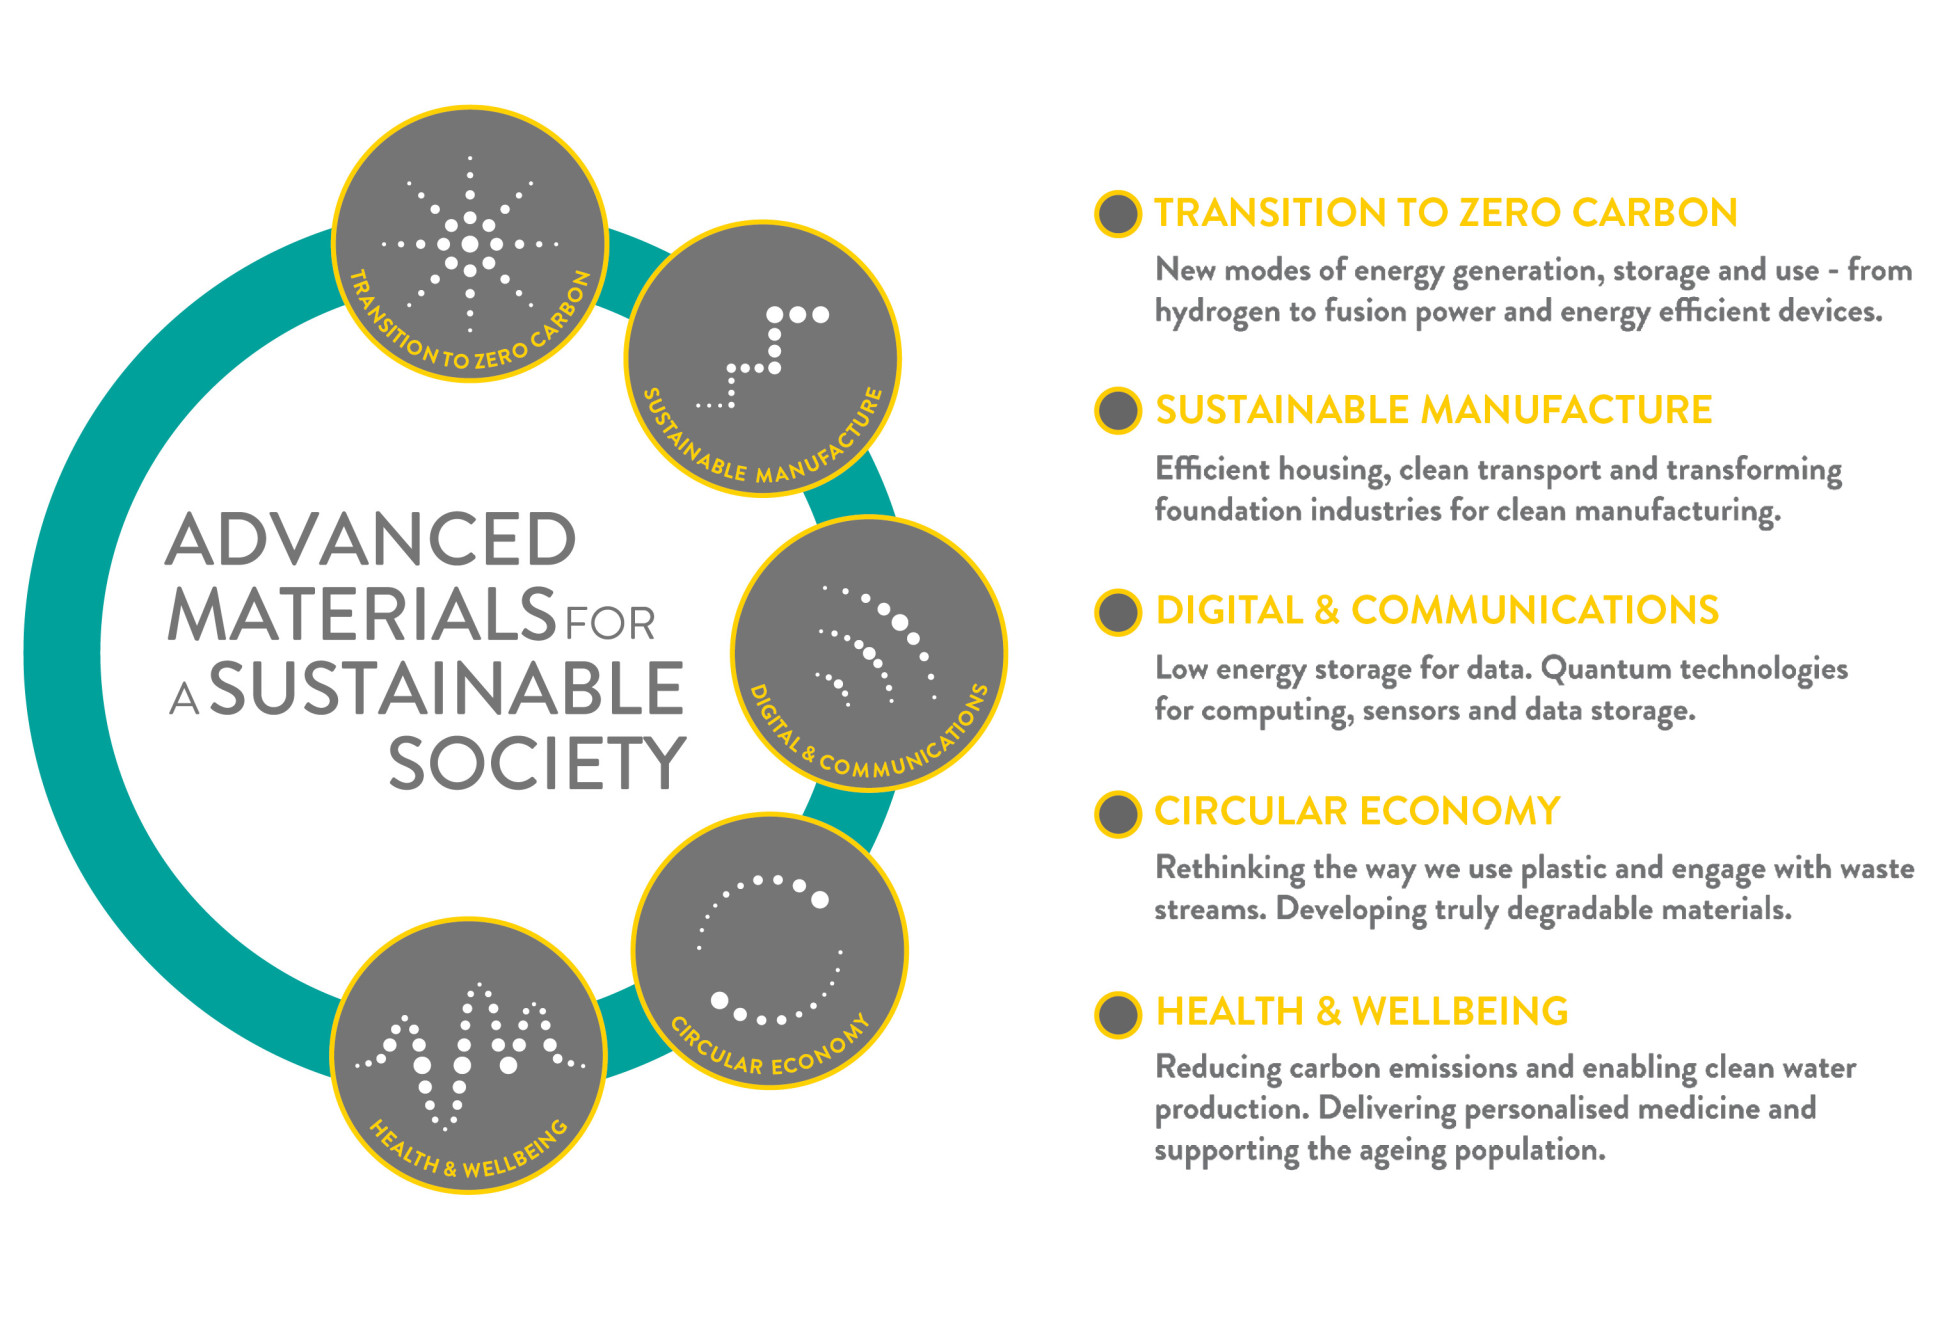 Advanced Materials for a Sustainable Society infographic